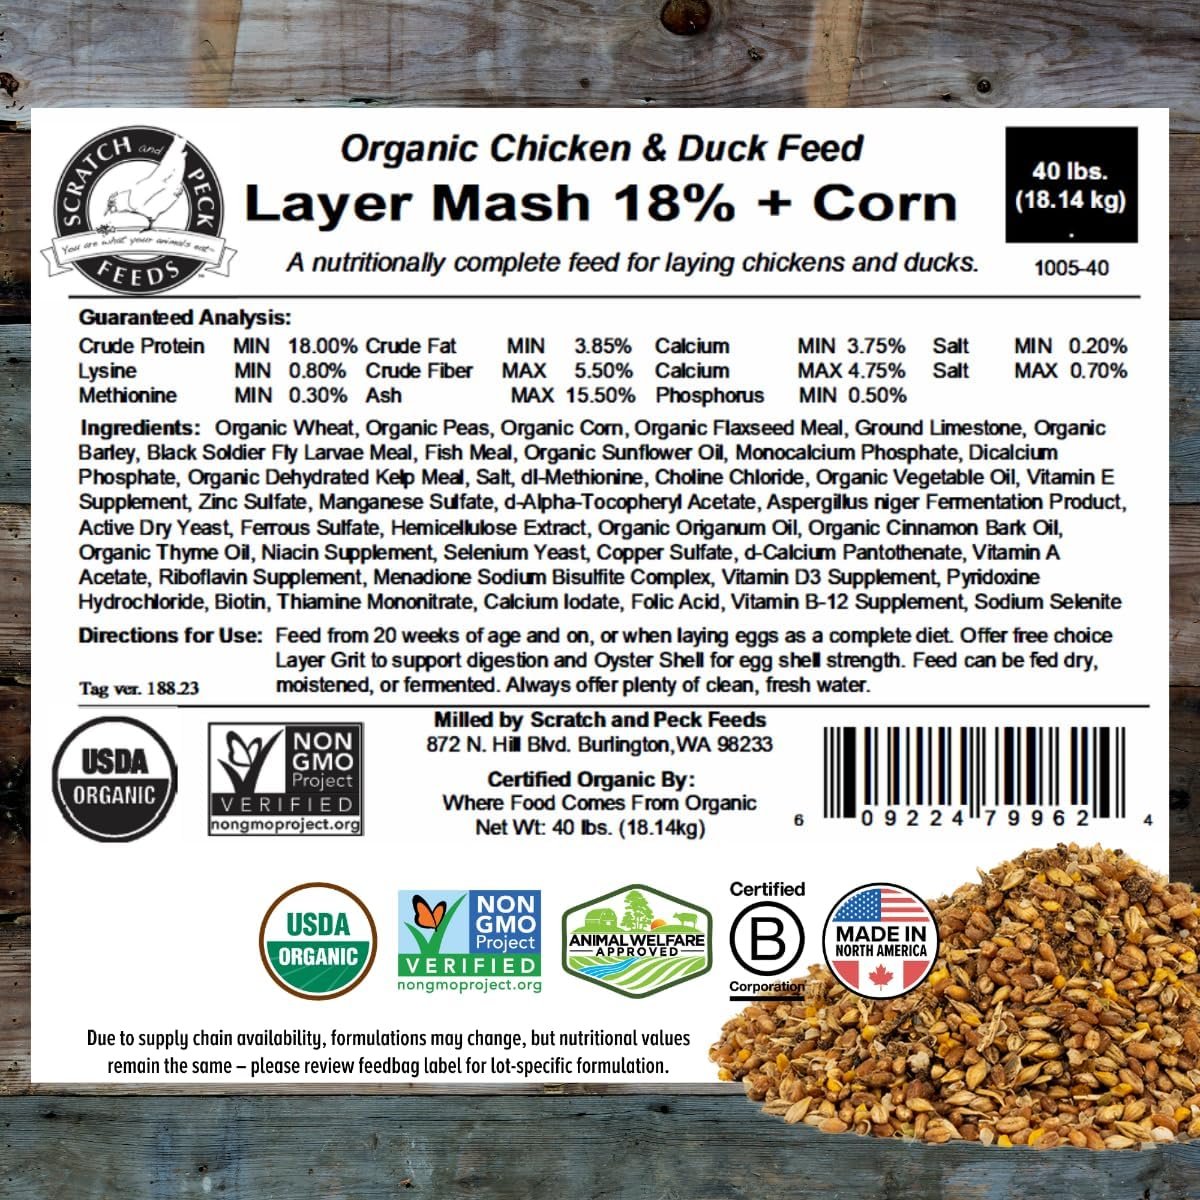 Scratch and Peck Feeds Organic Whole Grain Layer Feed + Corn, 18% Protein - Premium Chicken and Duck Feed Formulated with Sustainable Grub Protein, Vitamins, and Minerals - 40lb